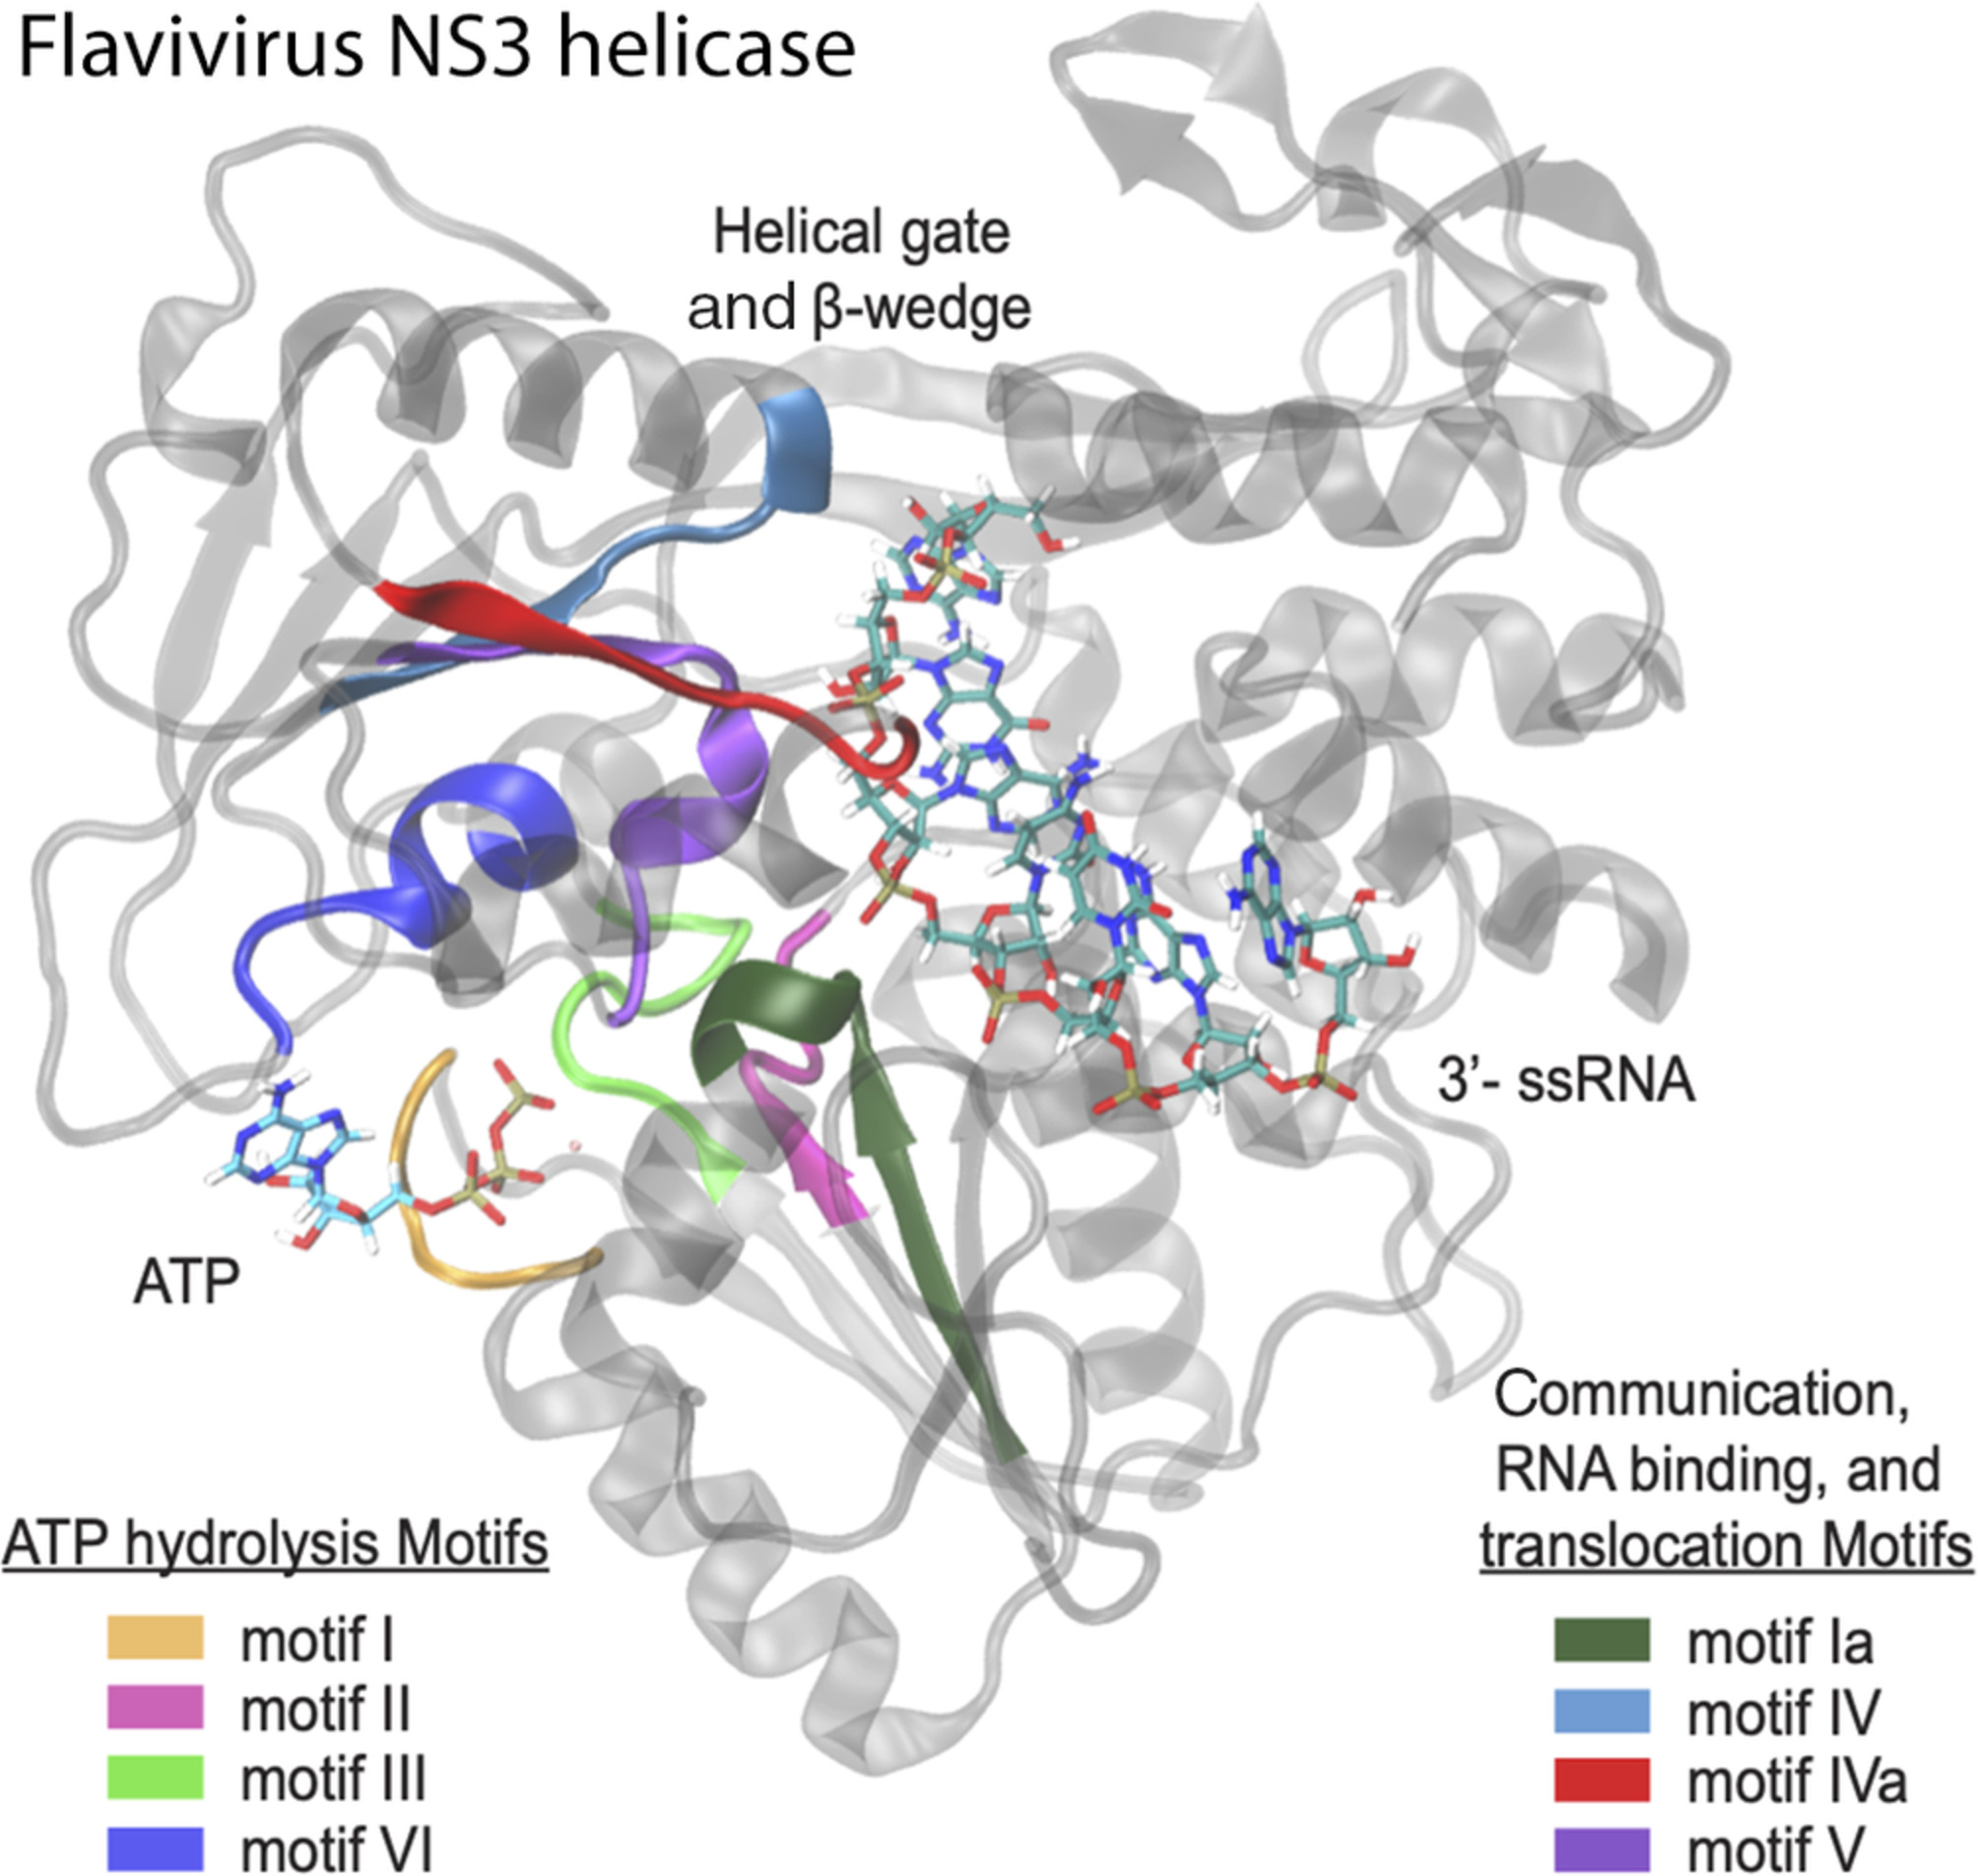 Conserved motifs in the flavivirus NS3 RNA helicase enzyme